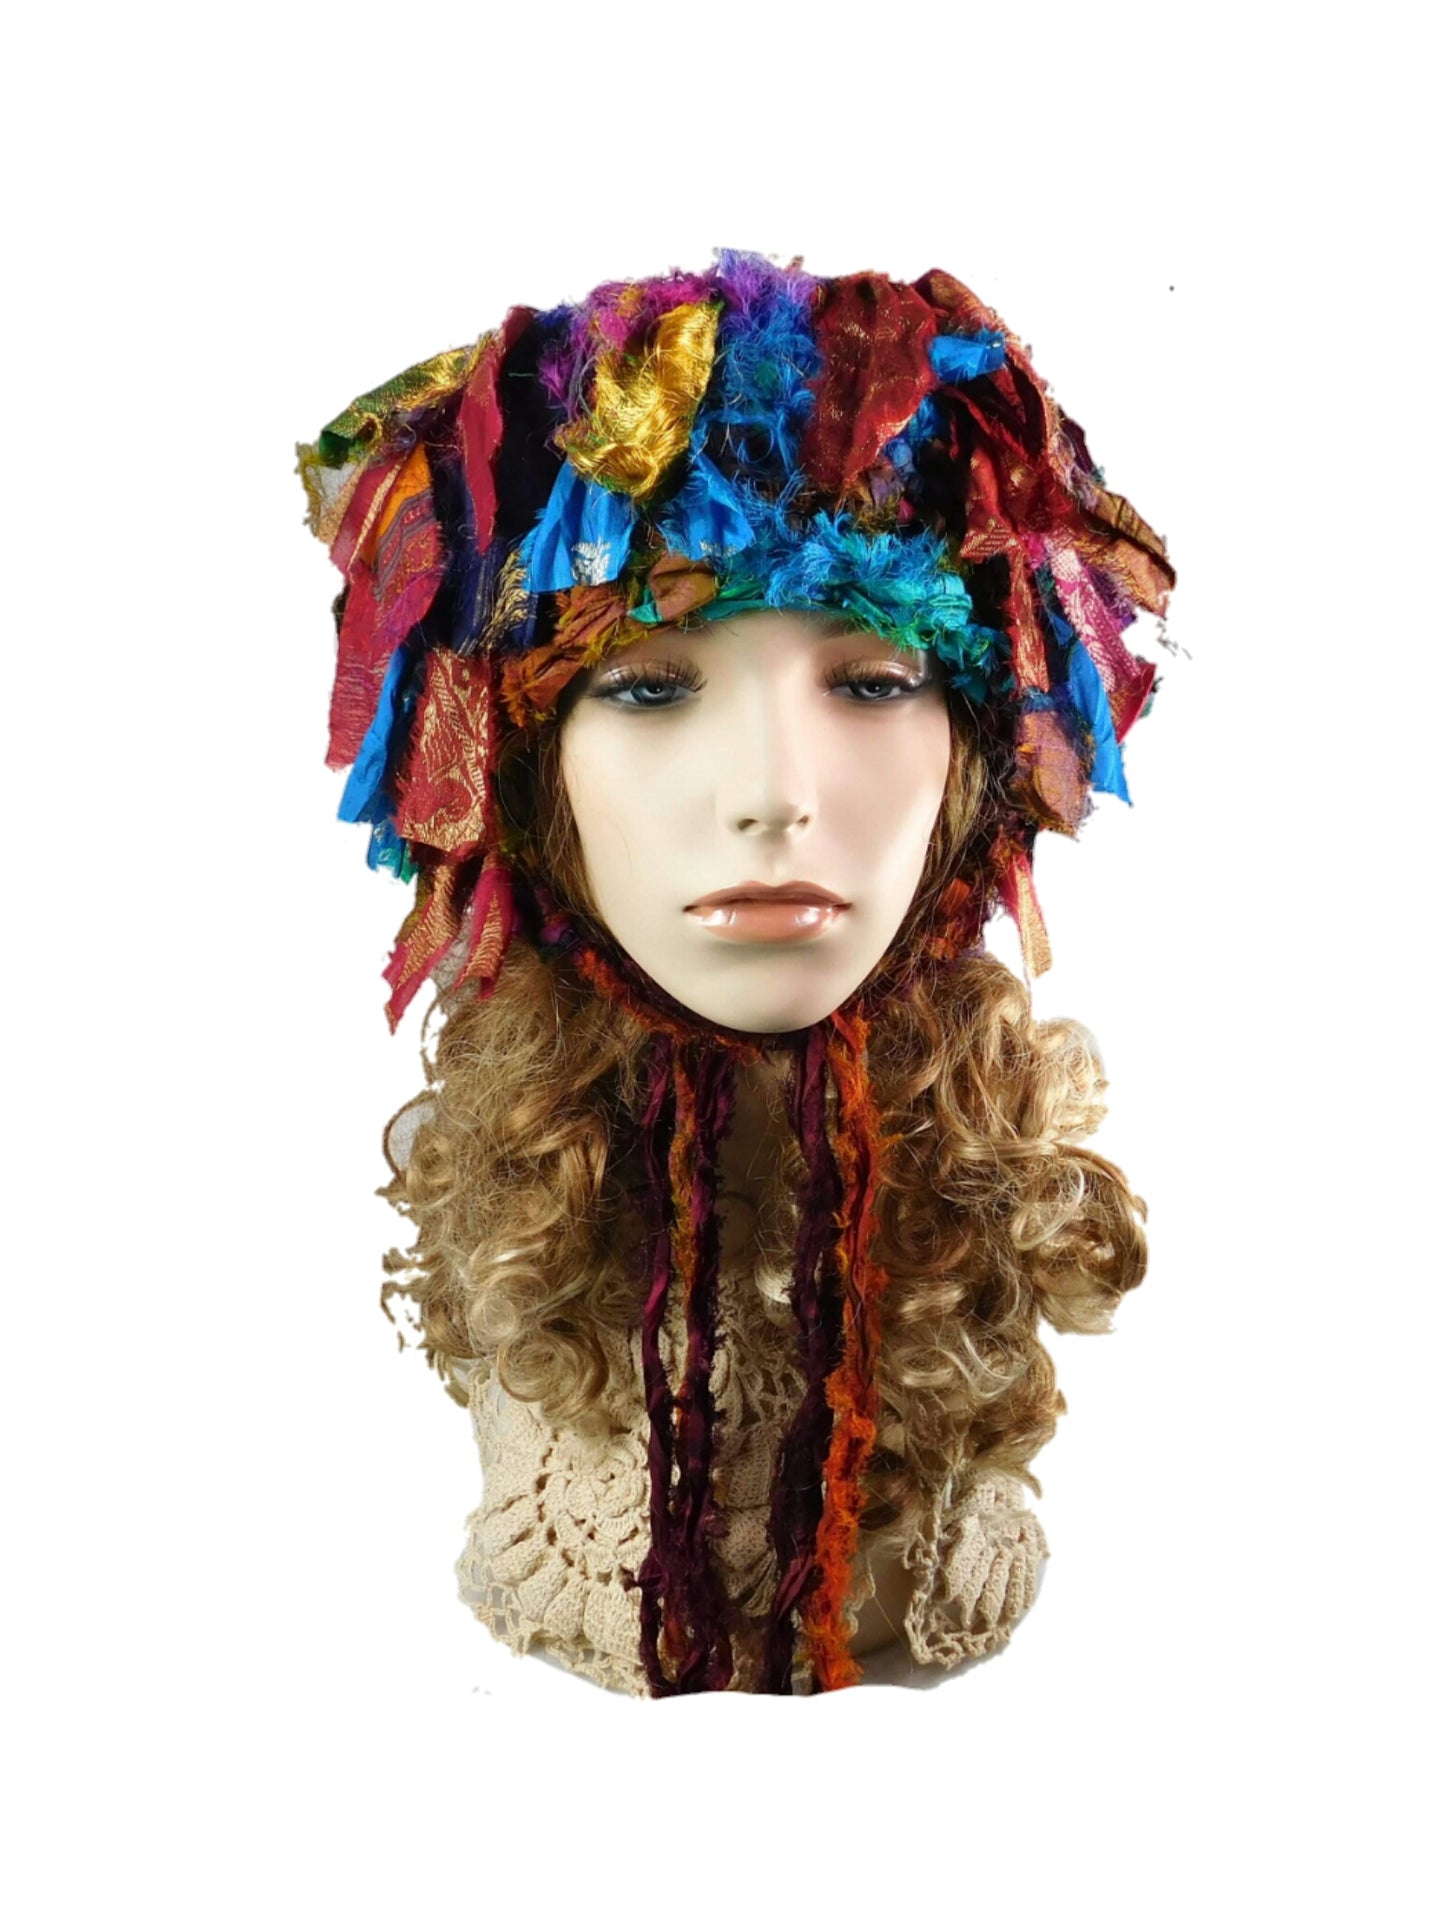 100% Handmade felted hat  made with recycled materials